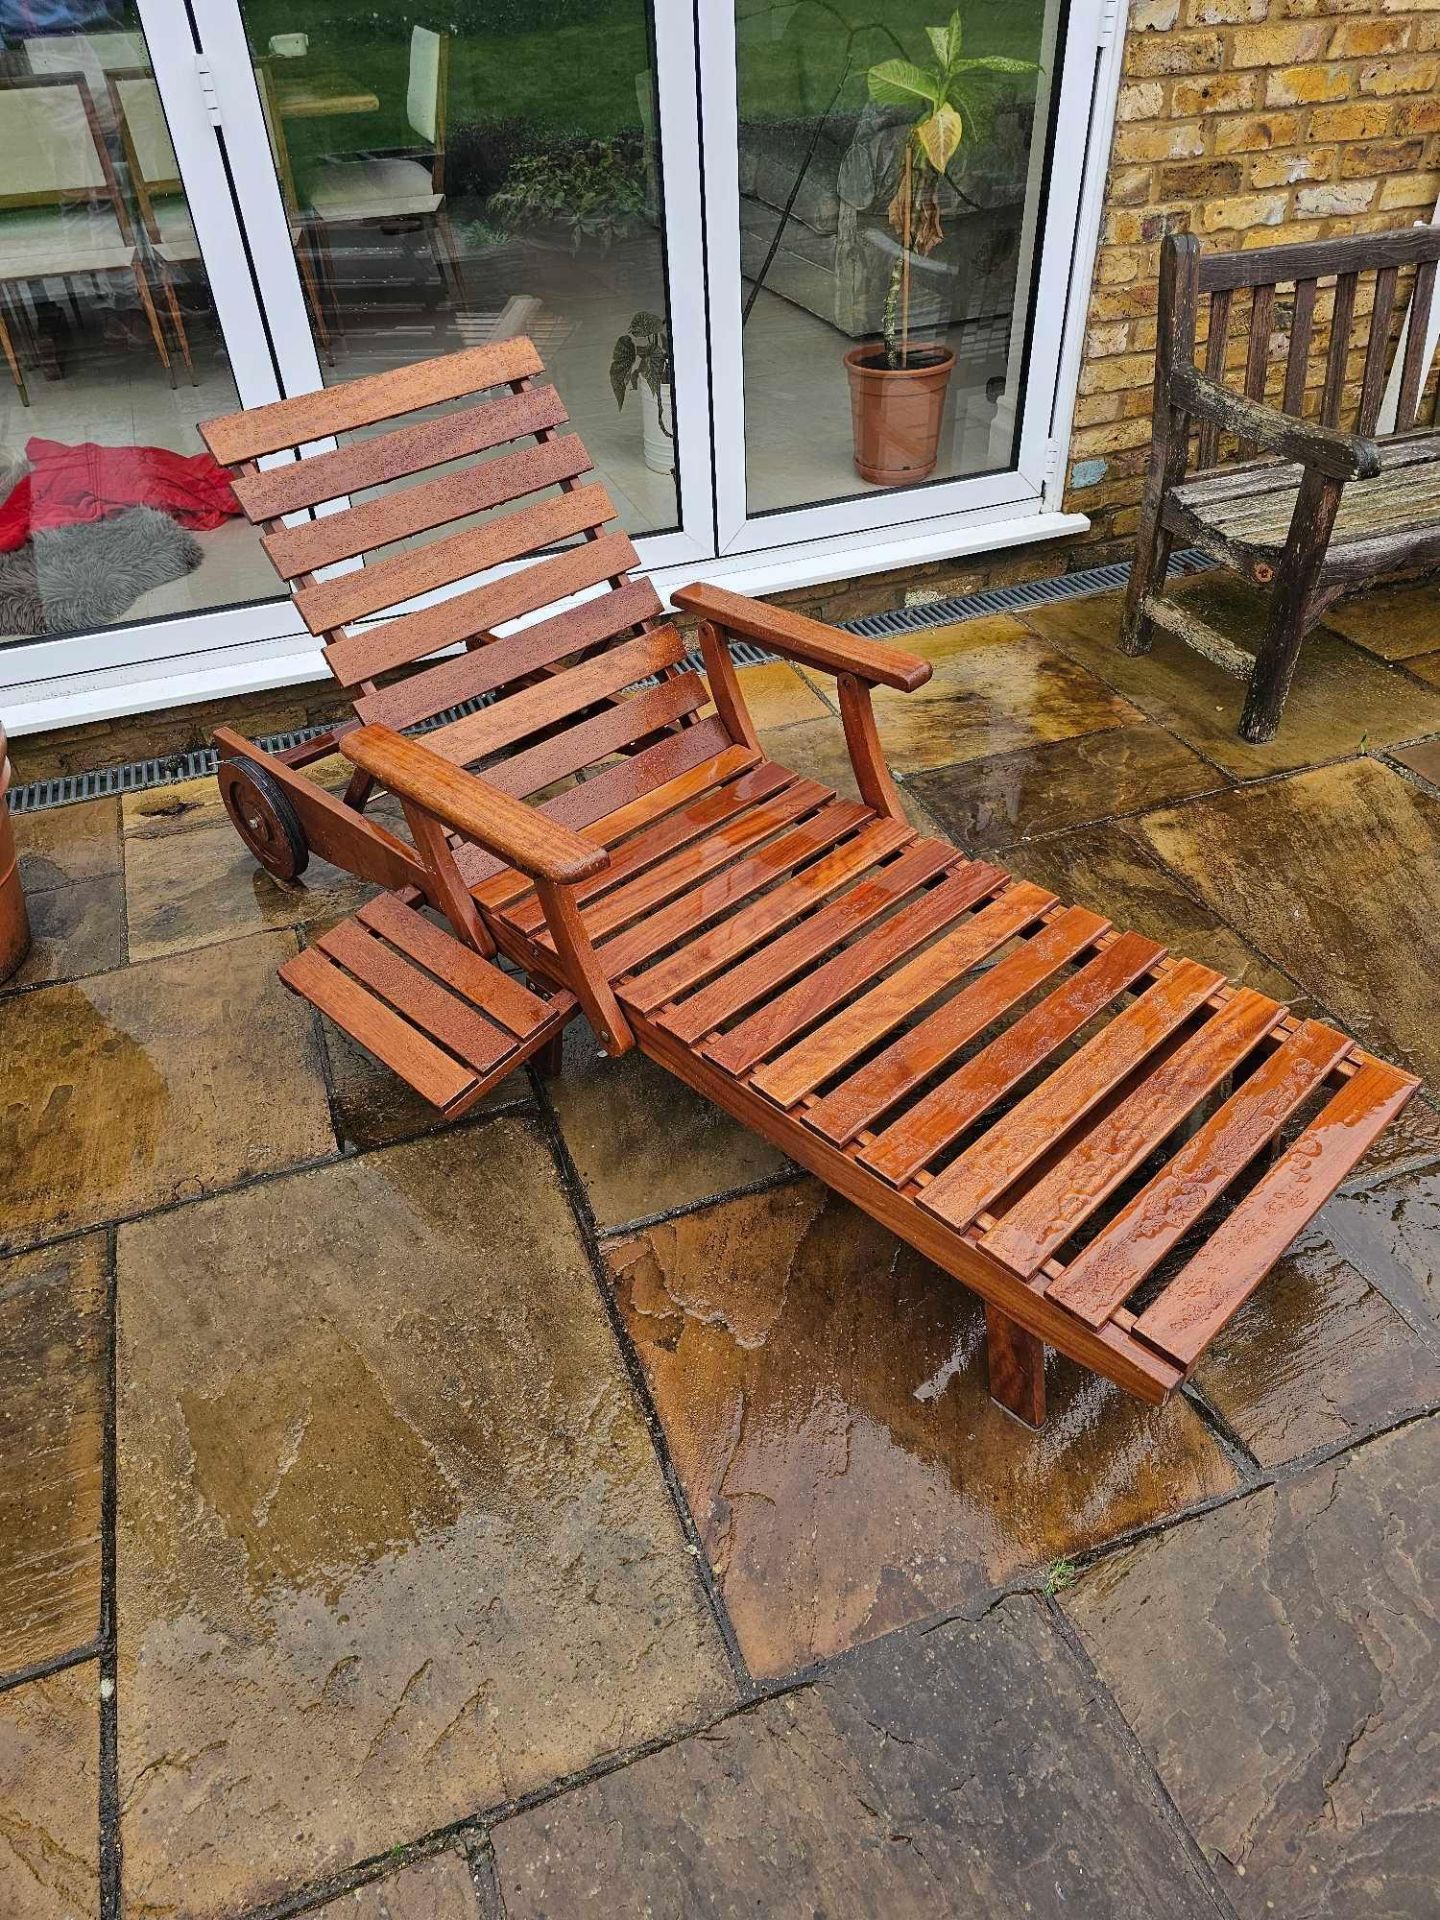 Teak Reclining Sun Lounger With Wheels And Tray Complete With Pad Cushion